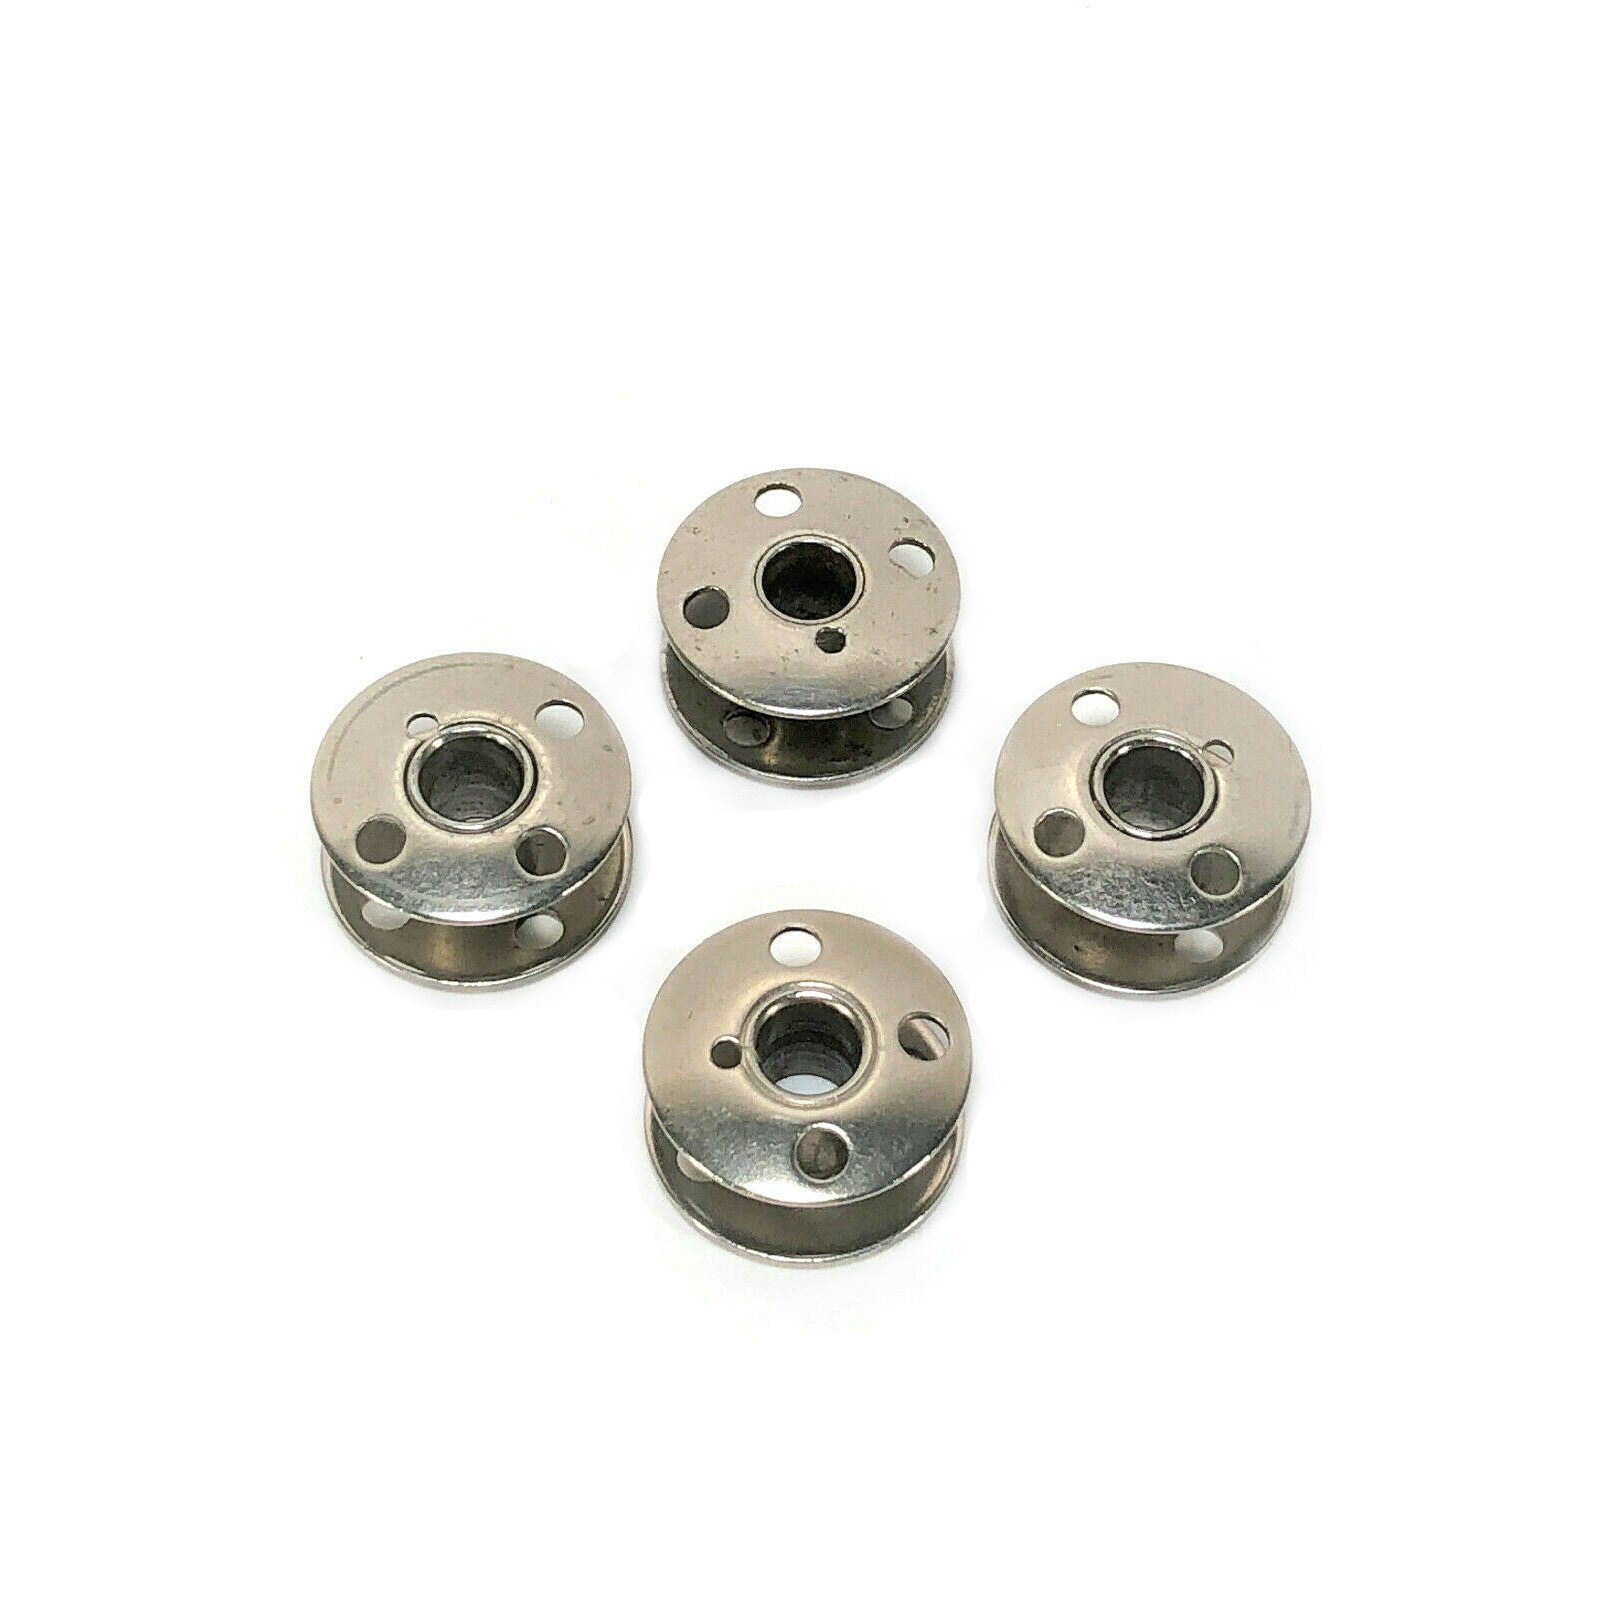 6 Hole Large U size bobbins for industrial sewing machines